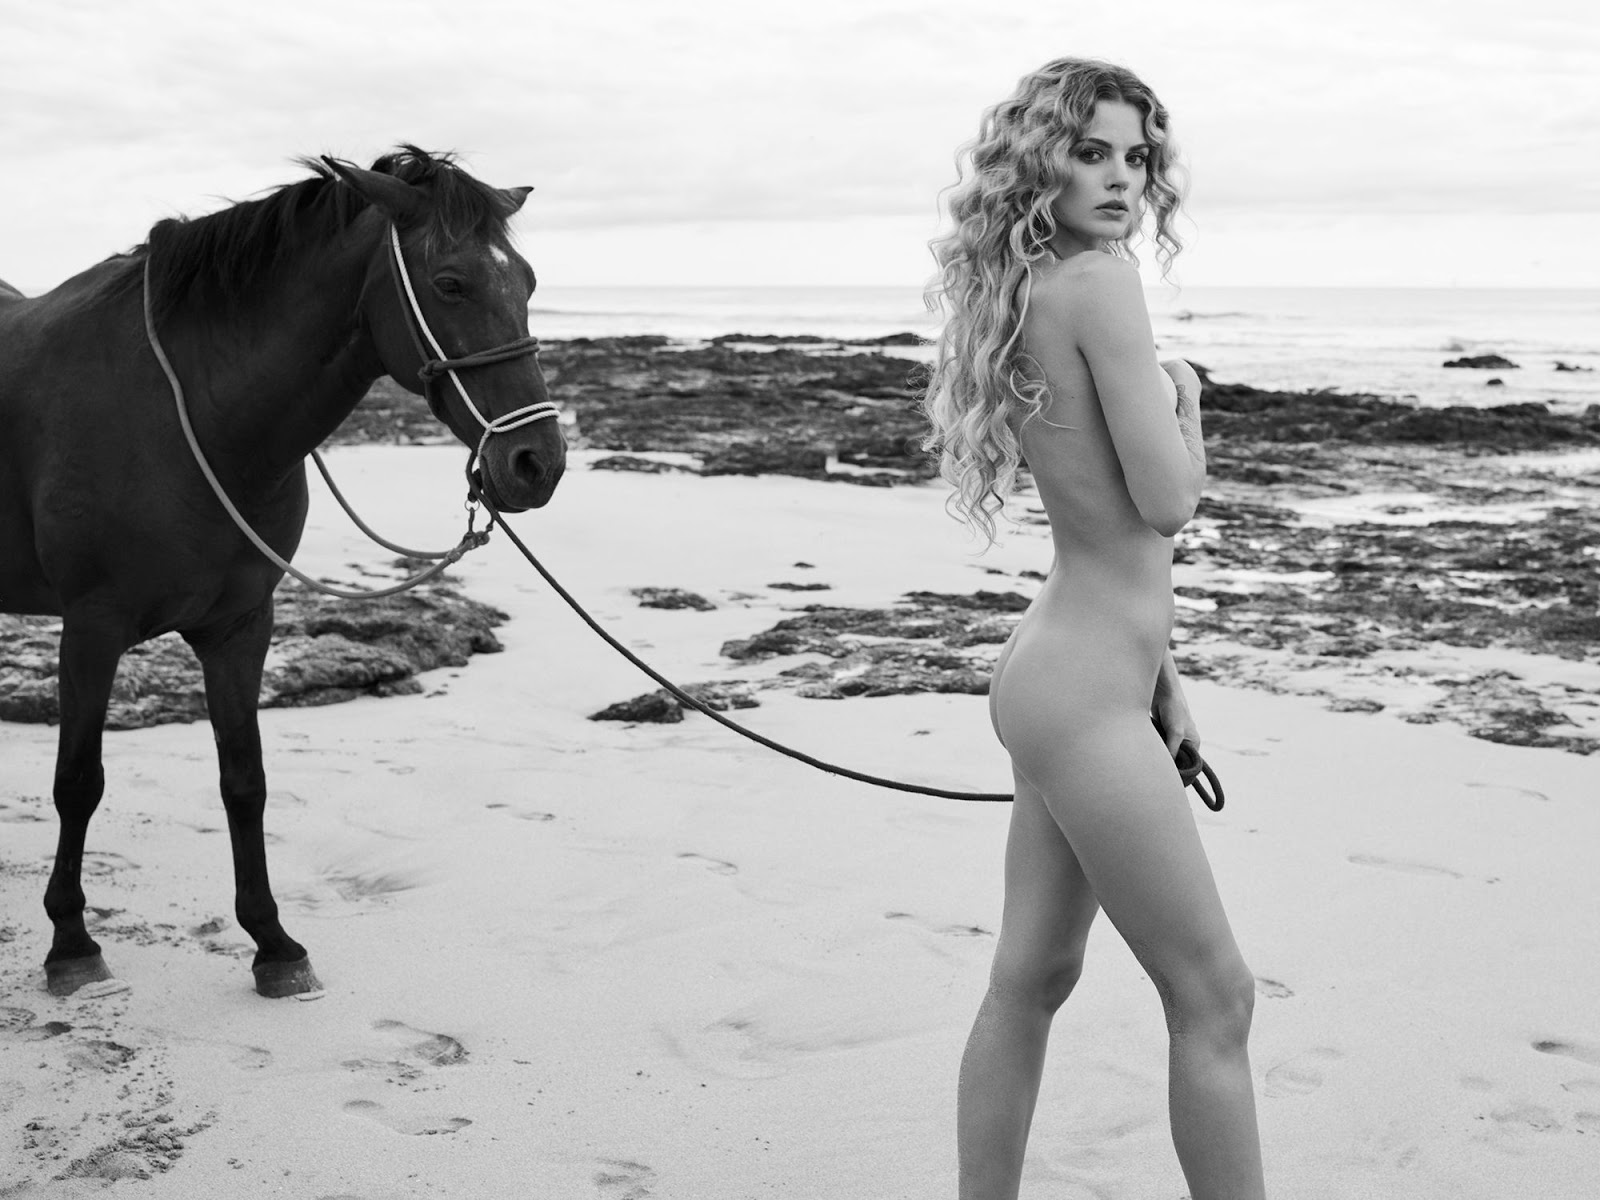 GNTM Cycle 15 3rd Episode : Nude on the Beach Photo Shoot.